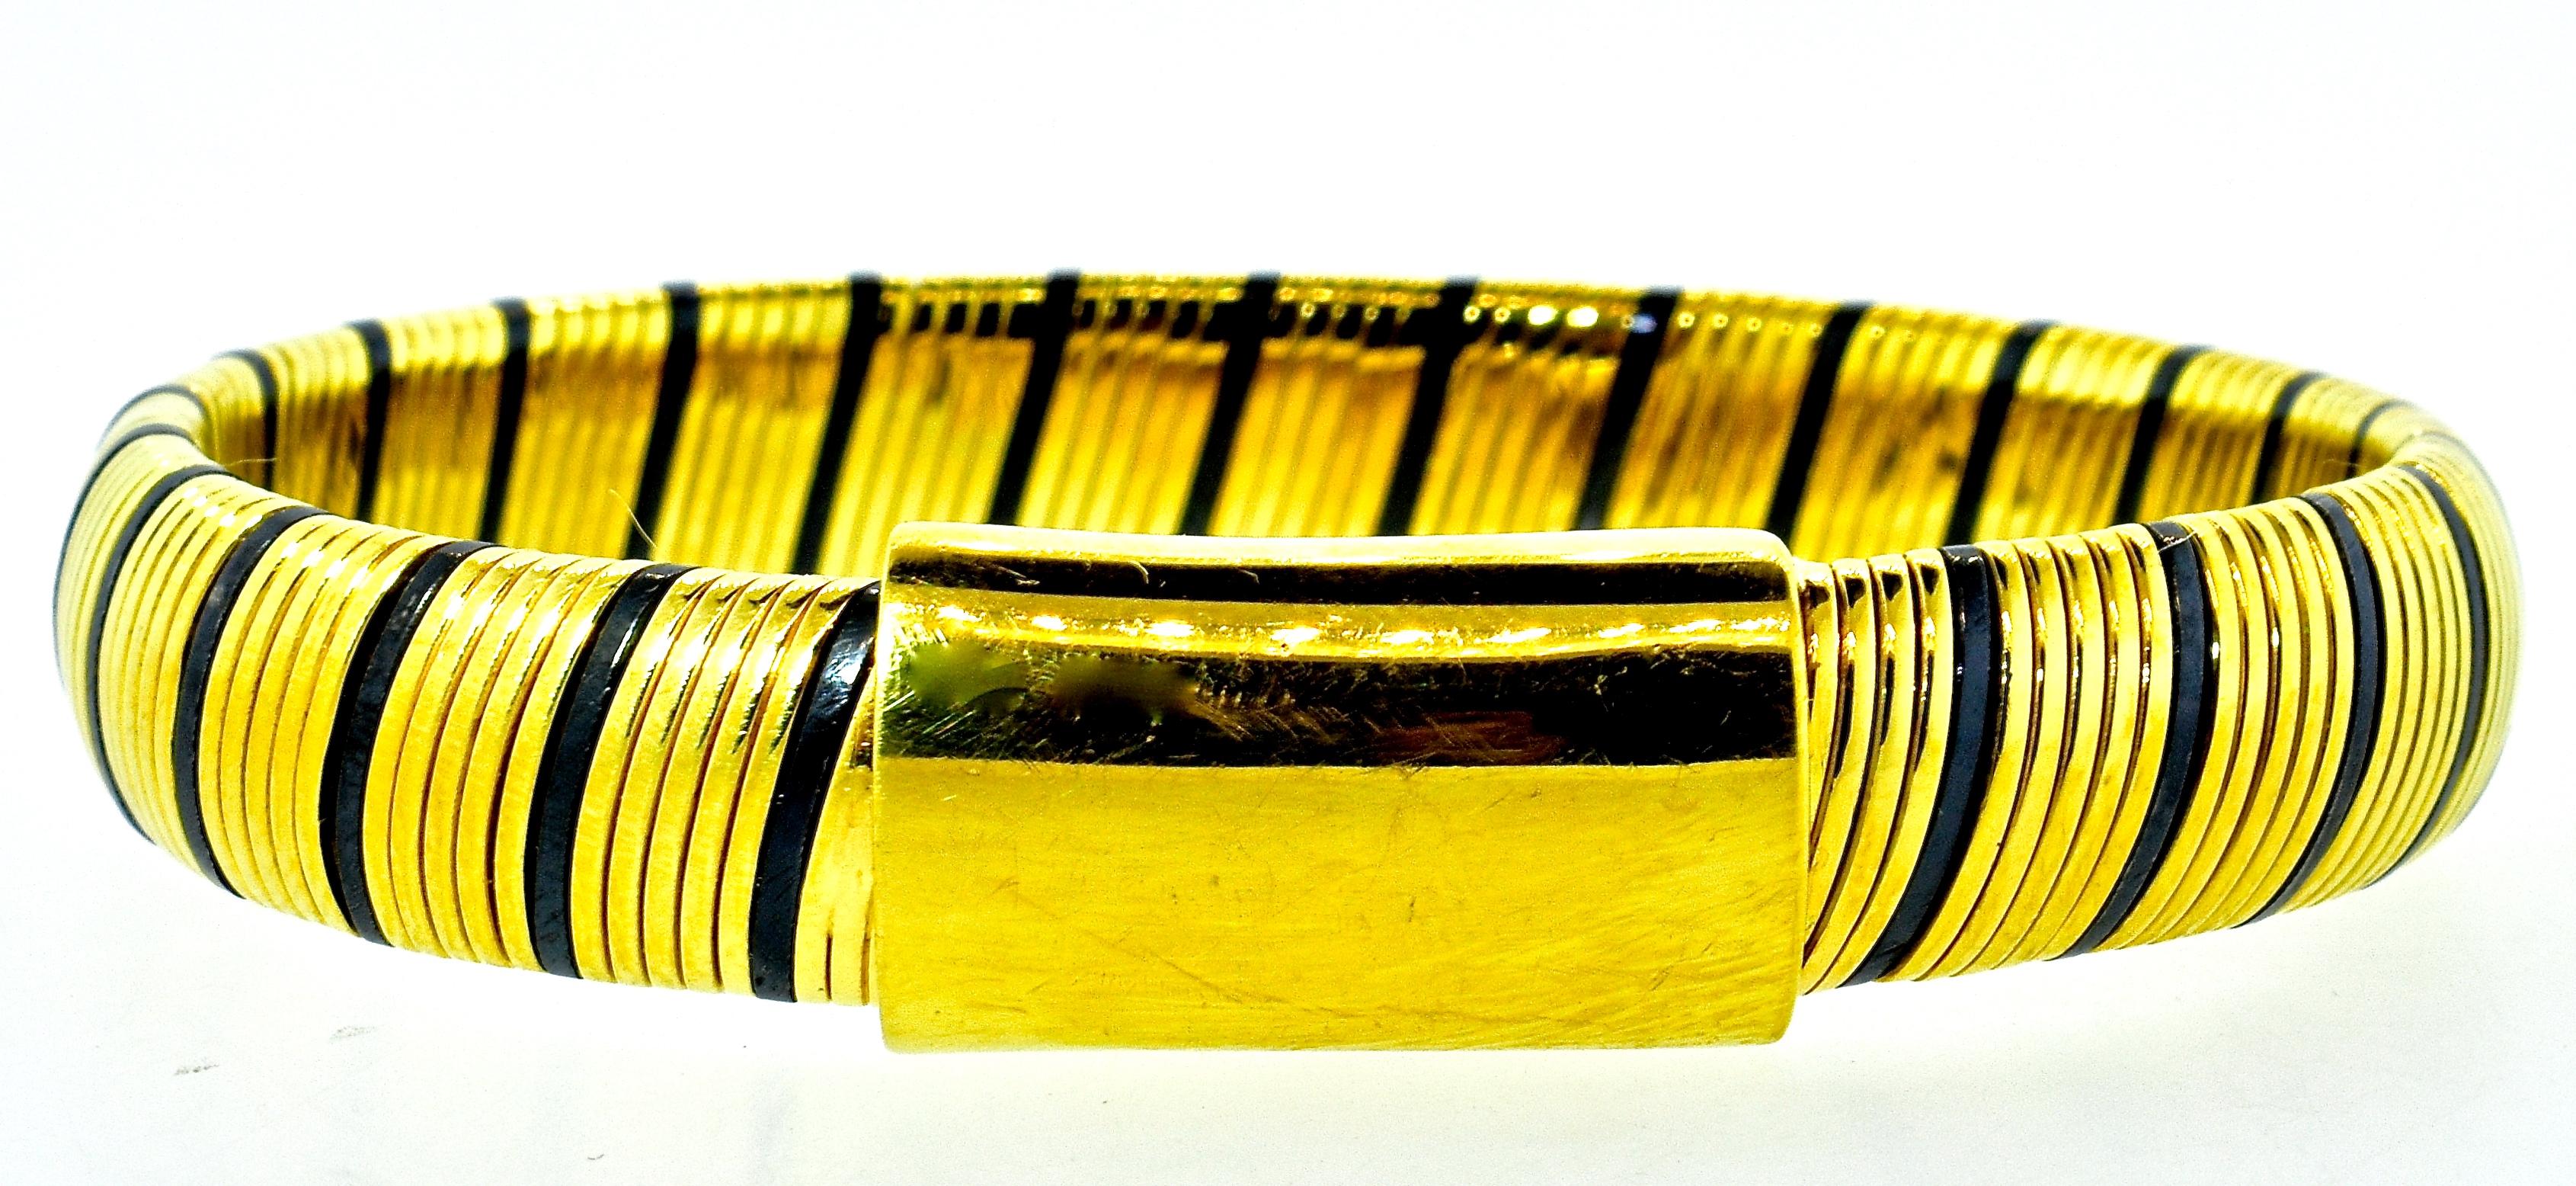 18K and black enamel bracelet which opens and expanse about an inch for ease of putting on.  This 18K ( marked 750) bracelet with stripes of black enamel weighs 44 grams.  When closed the interior dimensions is 6 inches and the width is 3/8ths. 